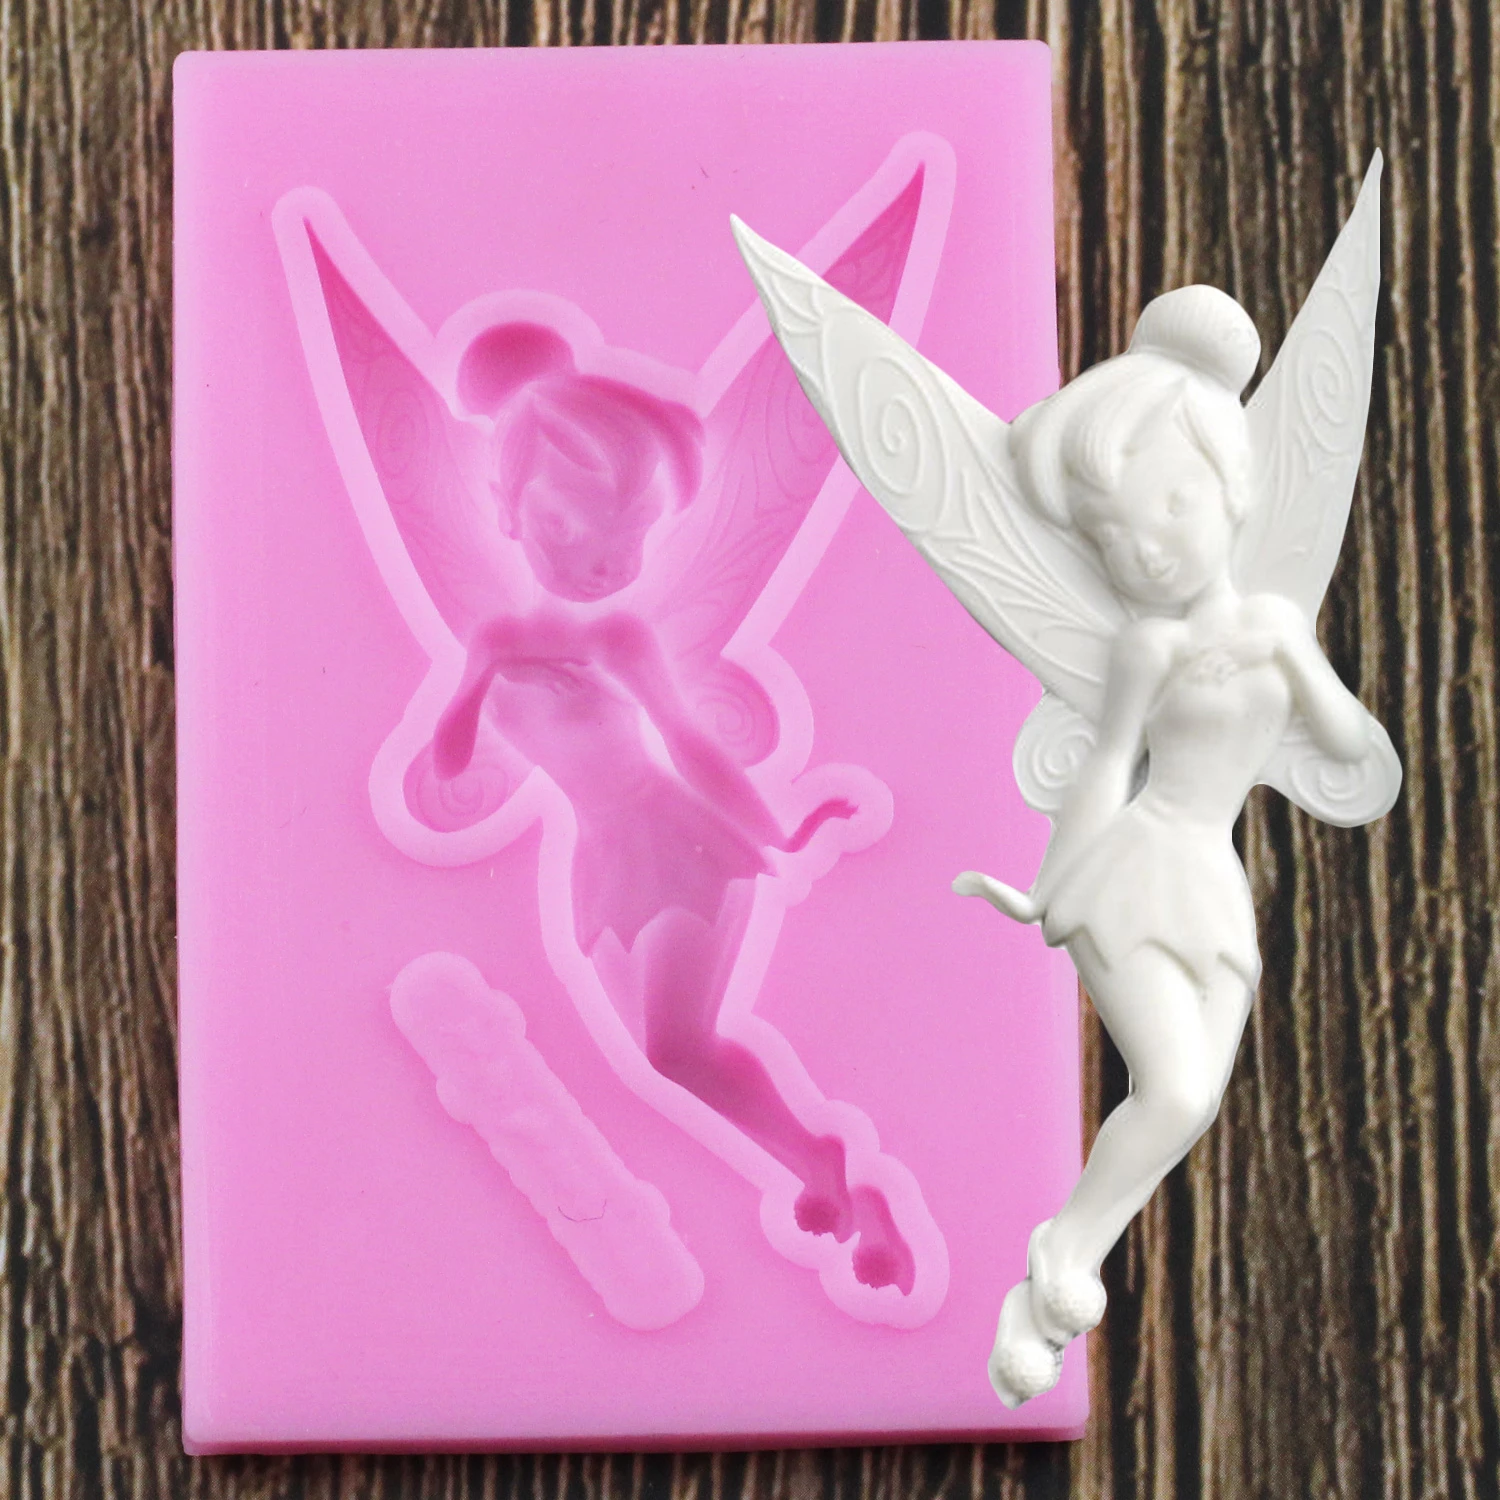 3D Childhood Flower Fairy Silicone Mold Gumpaste Chocolate Clay Candy Molds Fondant DIY Party Cake Decorating Tools